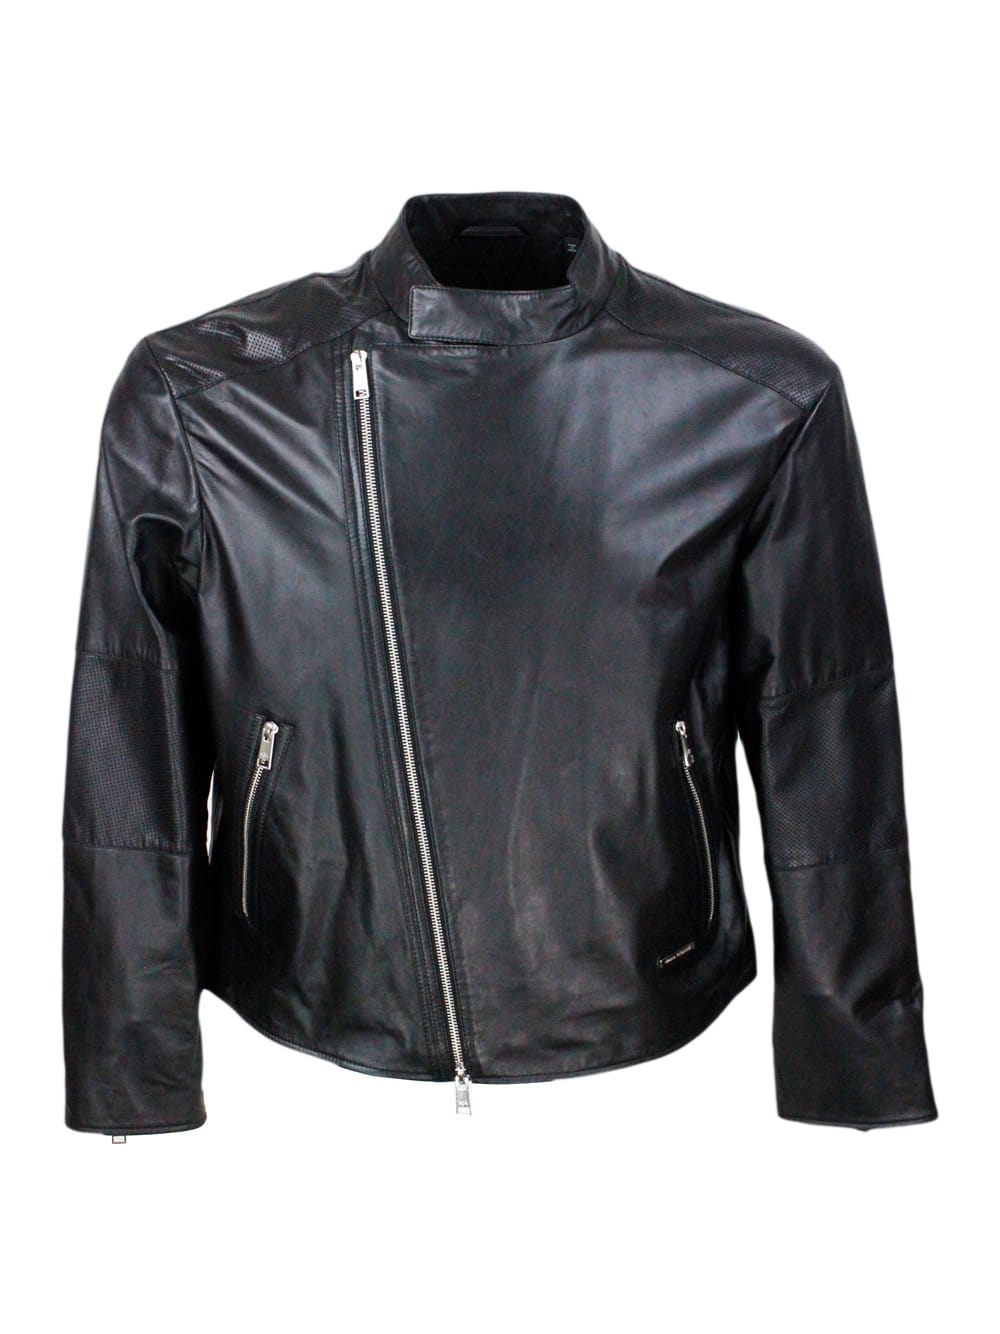 Jacket With Zip Closure Made Of Soft Lambskin With Perforated Leather Details. Zip On Pockets And Cuffs